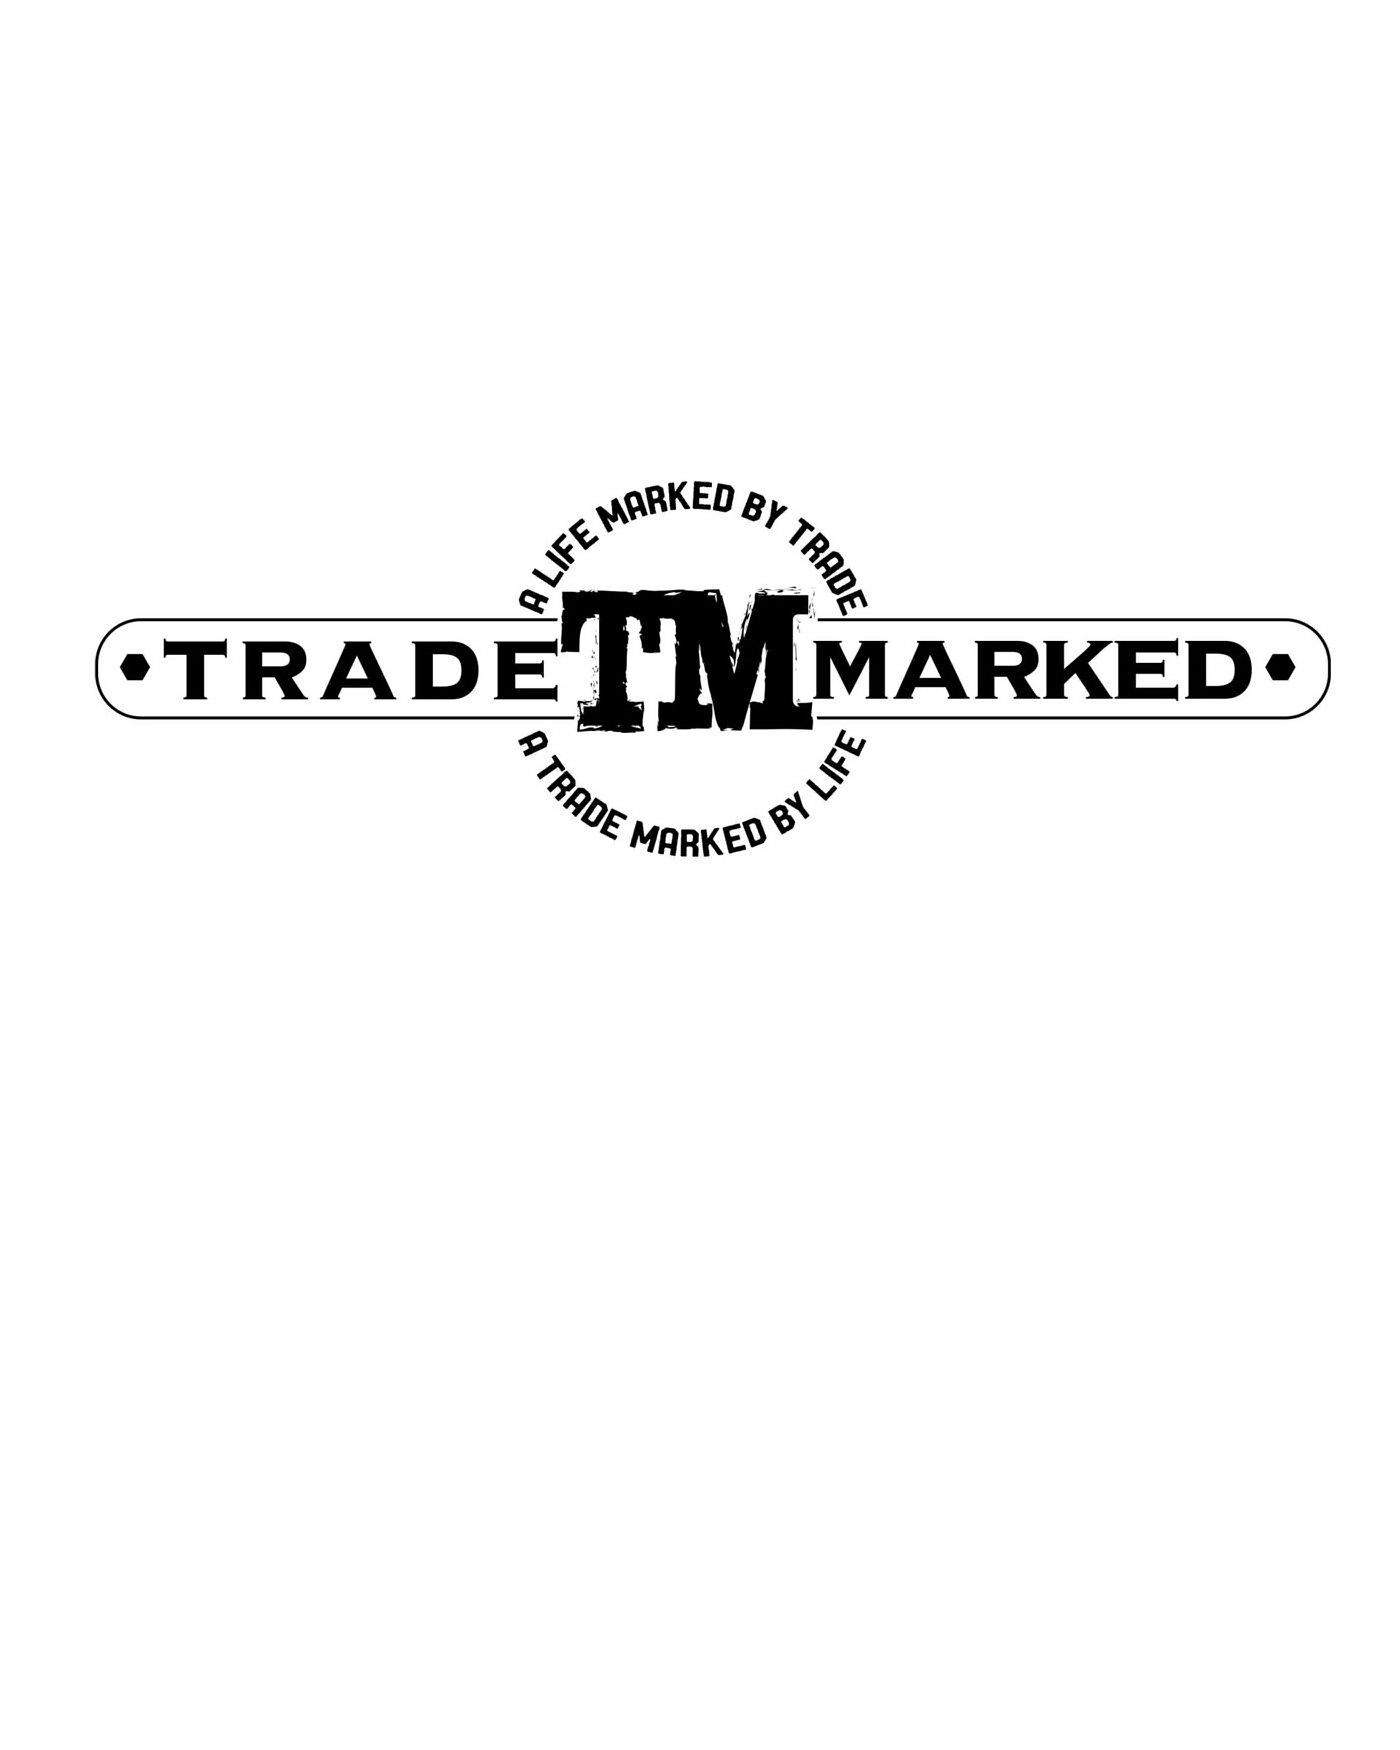  TRADE MARKED TM A LIFE MARKED BY TRADE A TRADE MARKED BY LIFE